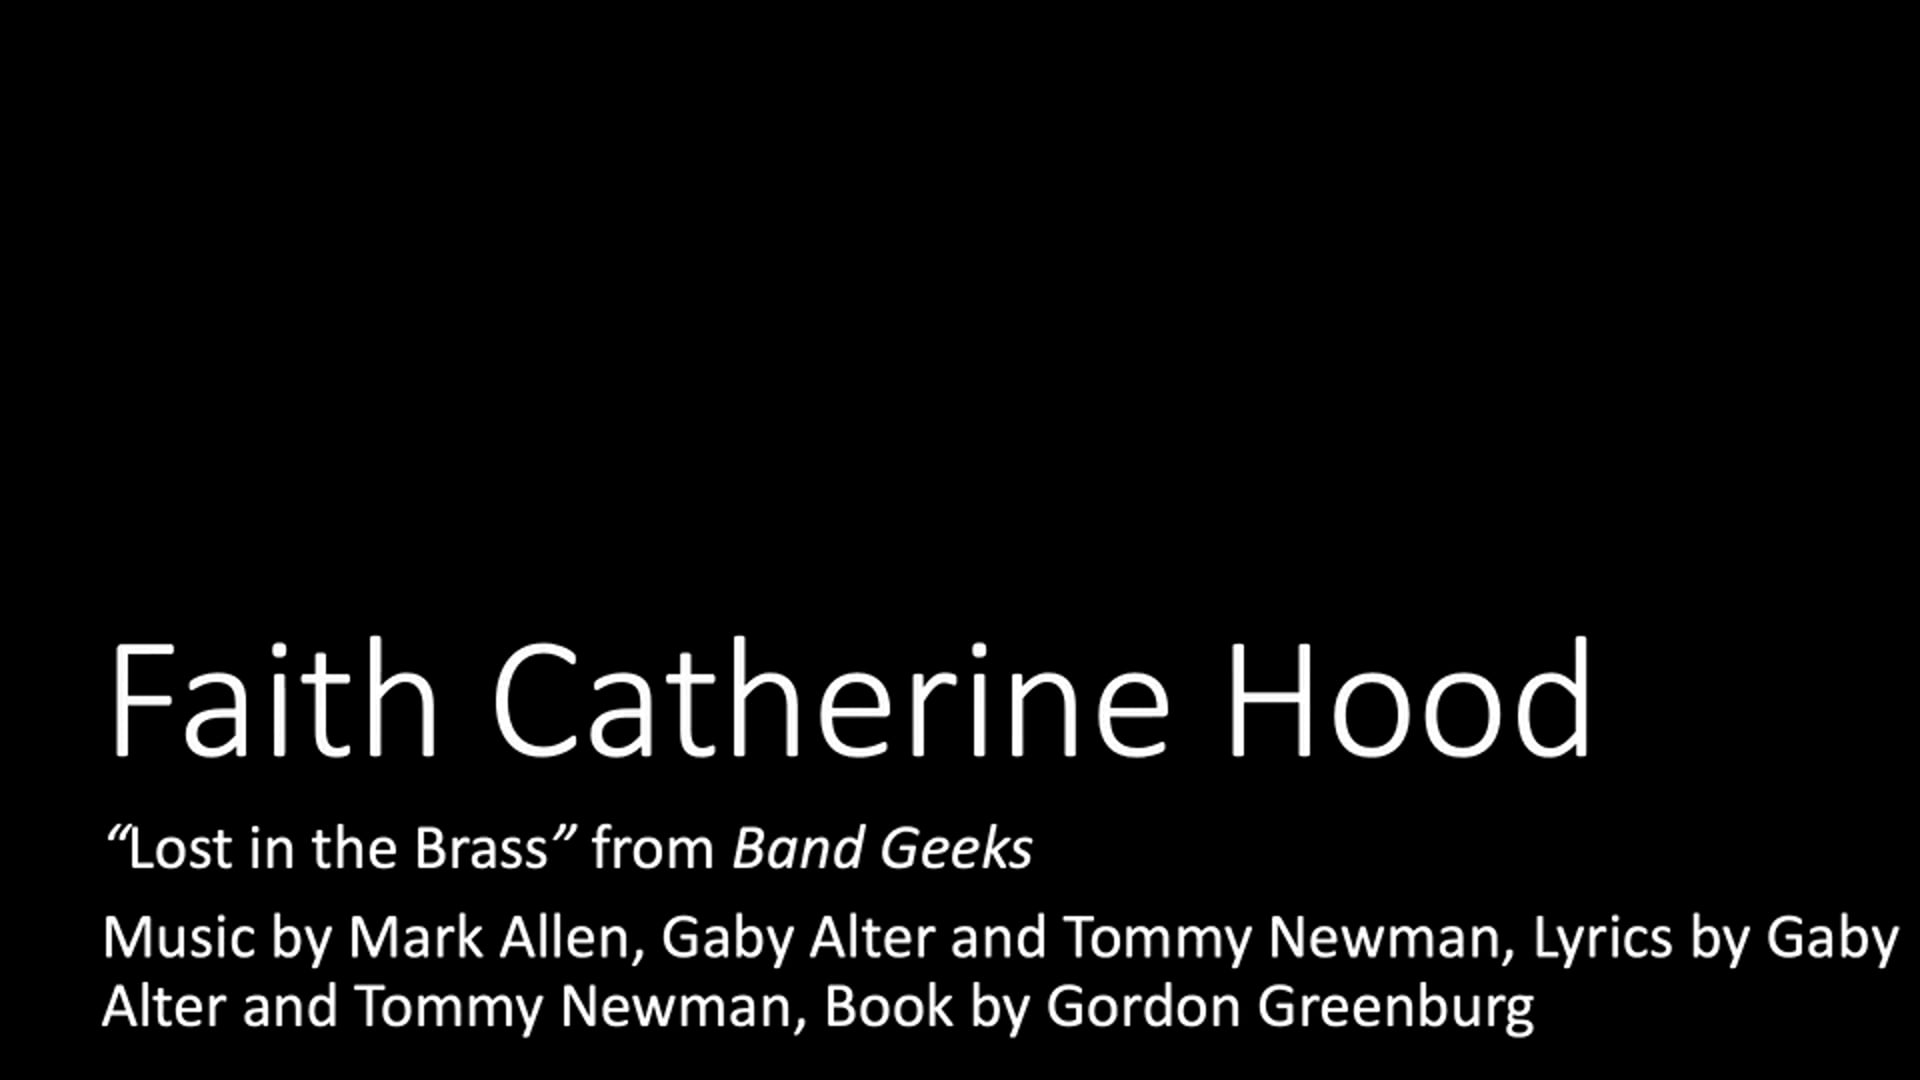 Faith Catherine Hood: Lost in the Brass